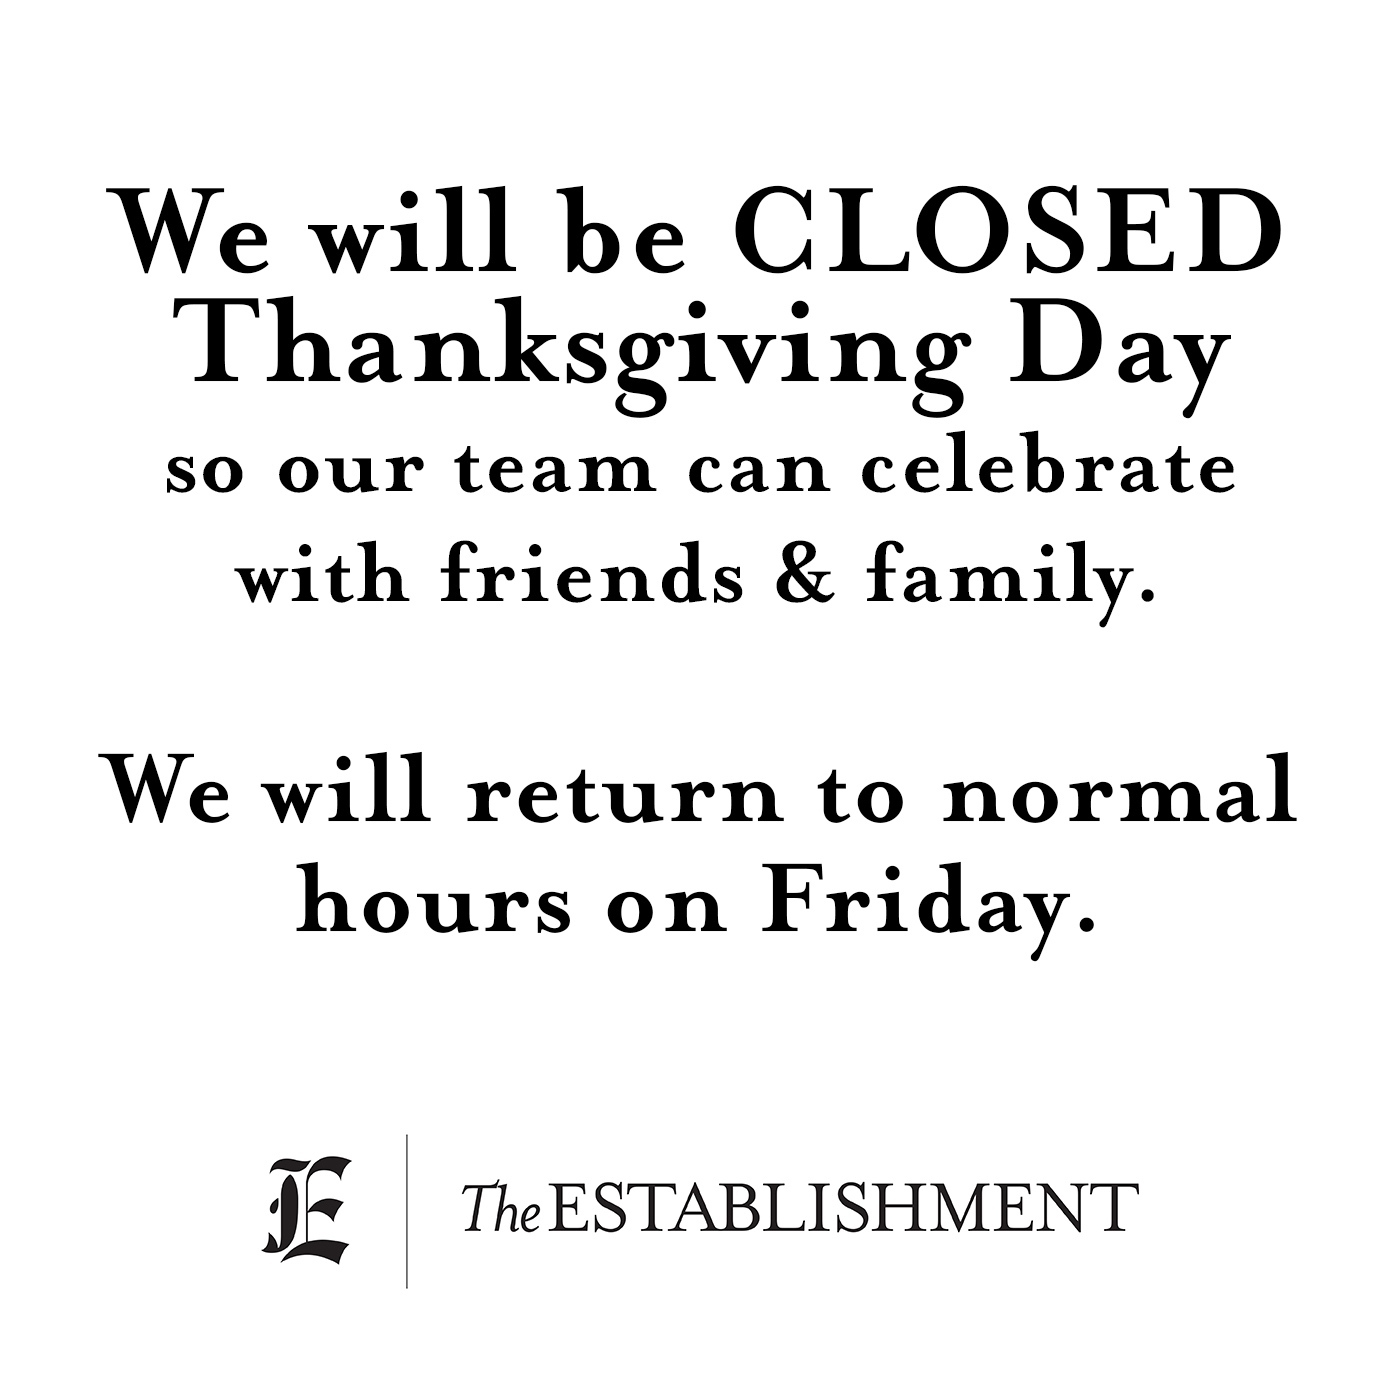 We will be CLOSED today for Thanksgiving so our team can celebrate with friends & family. We will return to normal hours on Friday<br/>
⁠
Gobble gobble!⁠
<br/>
<br/>
<br/>
#friends #family #southofbroad #charleston #thanksgiving #weclosed #feast #drinkup #chsdrinks #chseats